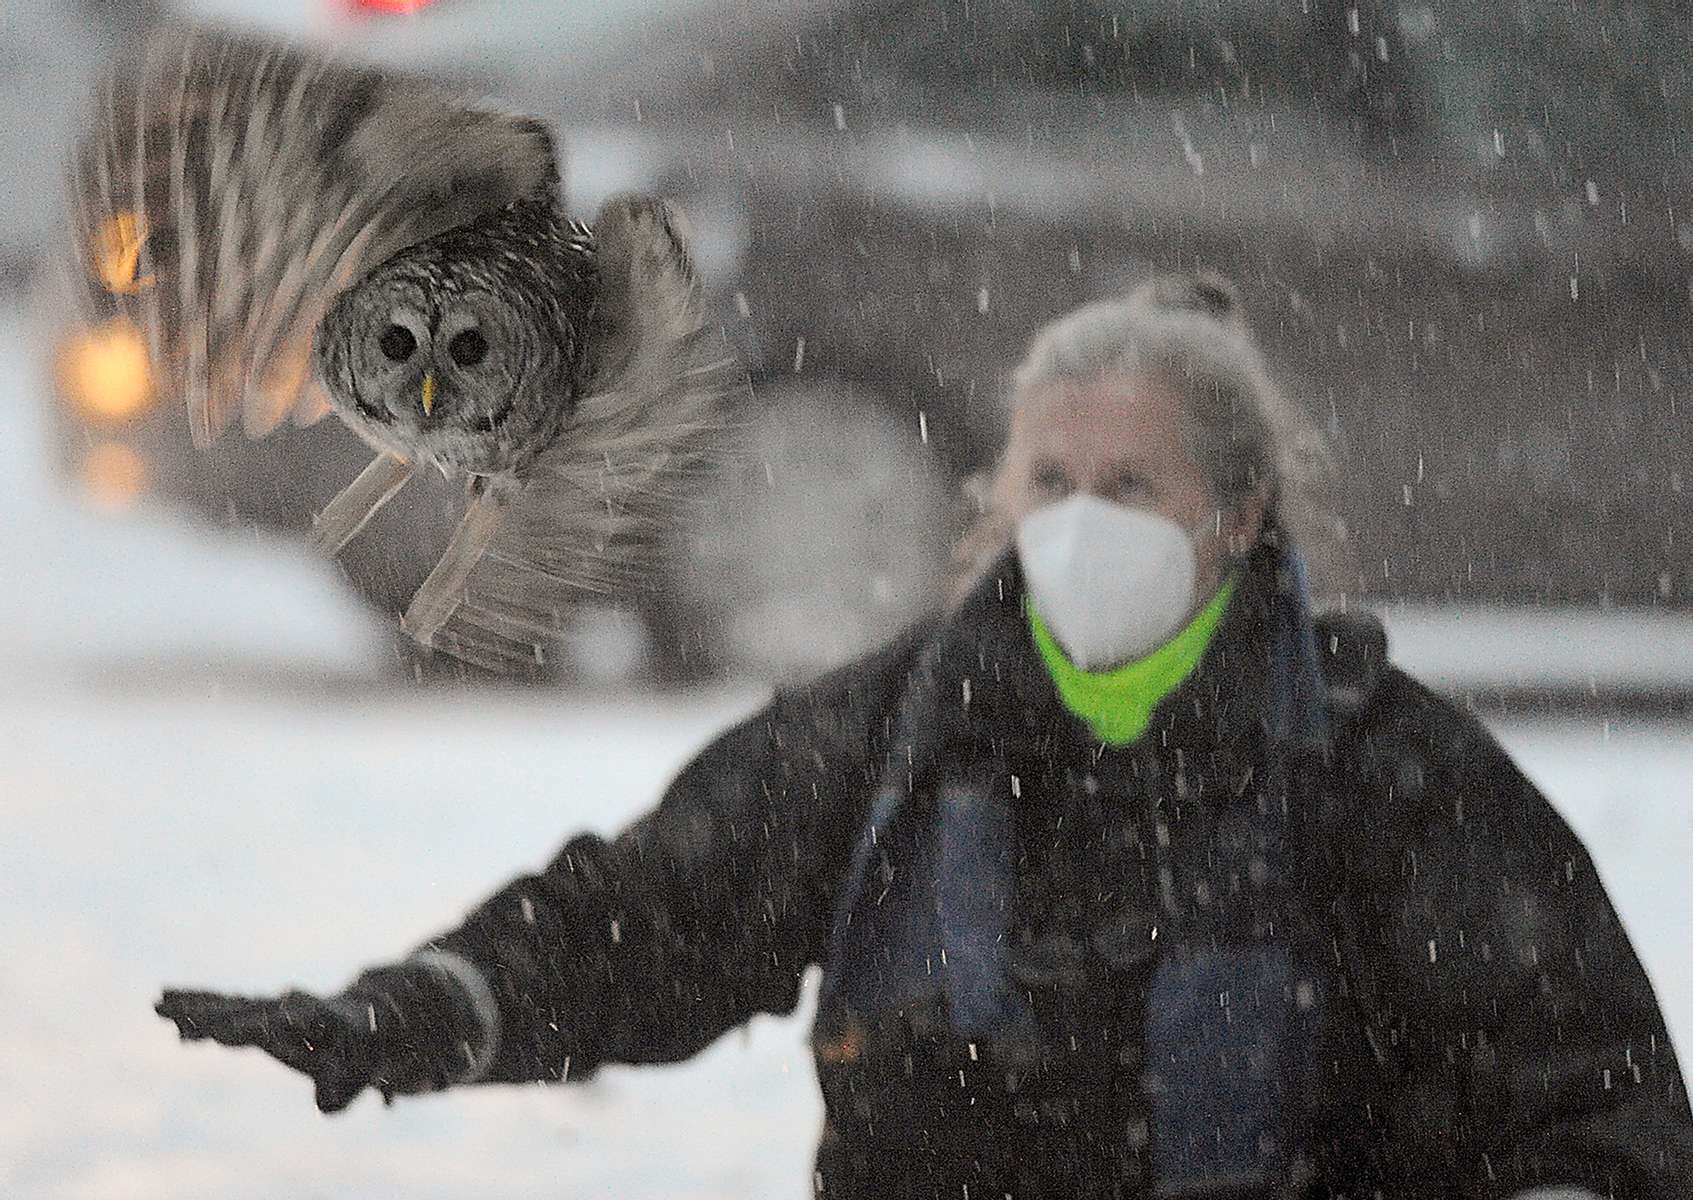 A barred owl is released back into the wild at Whitehall State Park in Hopkinton by Westborough Animal Control Officer Melinda MacKendrick, Jan. 26, 2021.  The owl was struck by a car Jan. 3, and received treatment and rehabilitation at the Tufts Wildlife Clinic. 